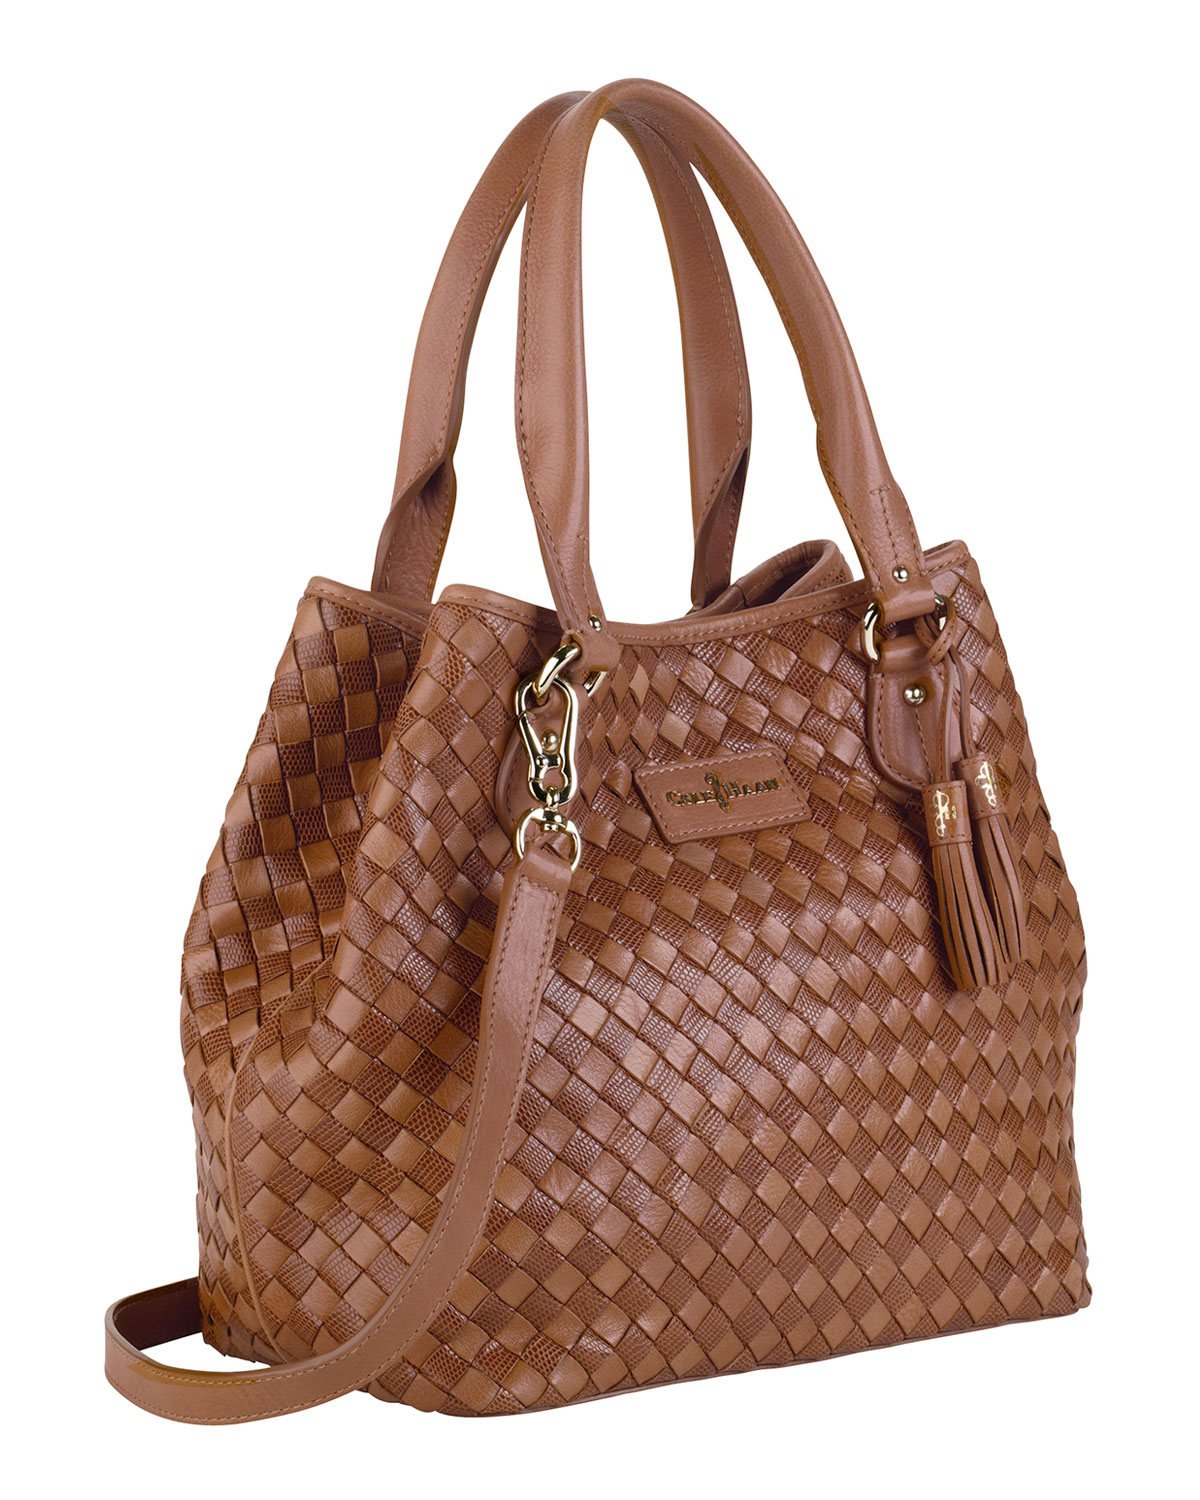 Lyst - Cole Haan Nora Woven Serena Tote Bag Brown in Brown